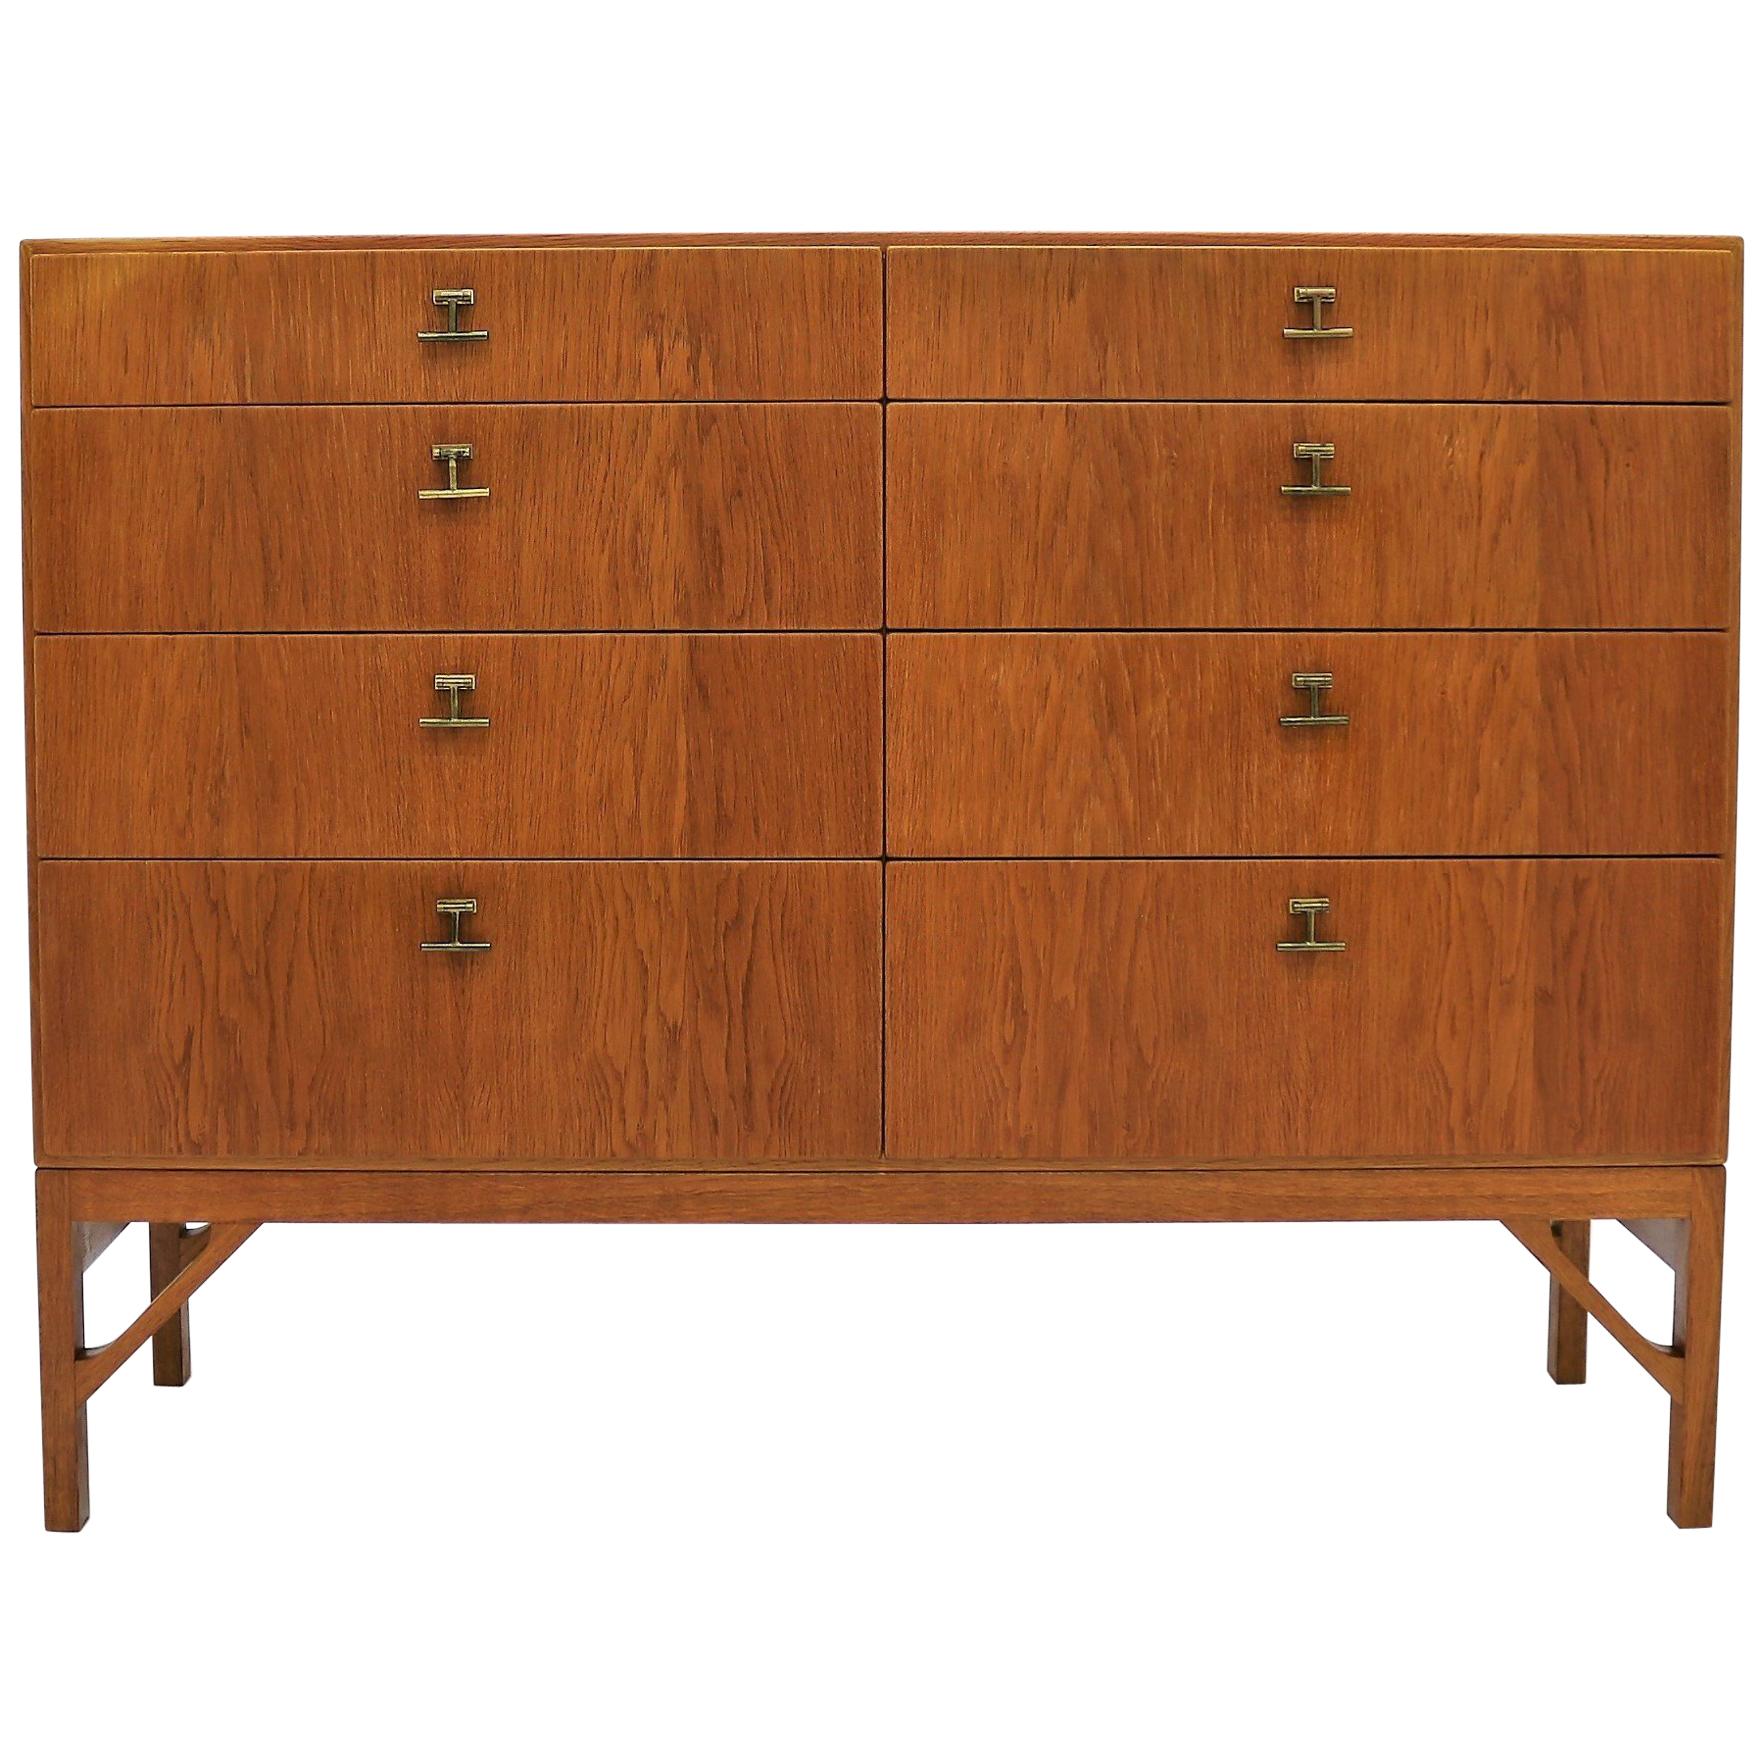 Chest of Drawers by Børge Mogensen in Oak for FDB Møbler, 1950s